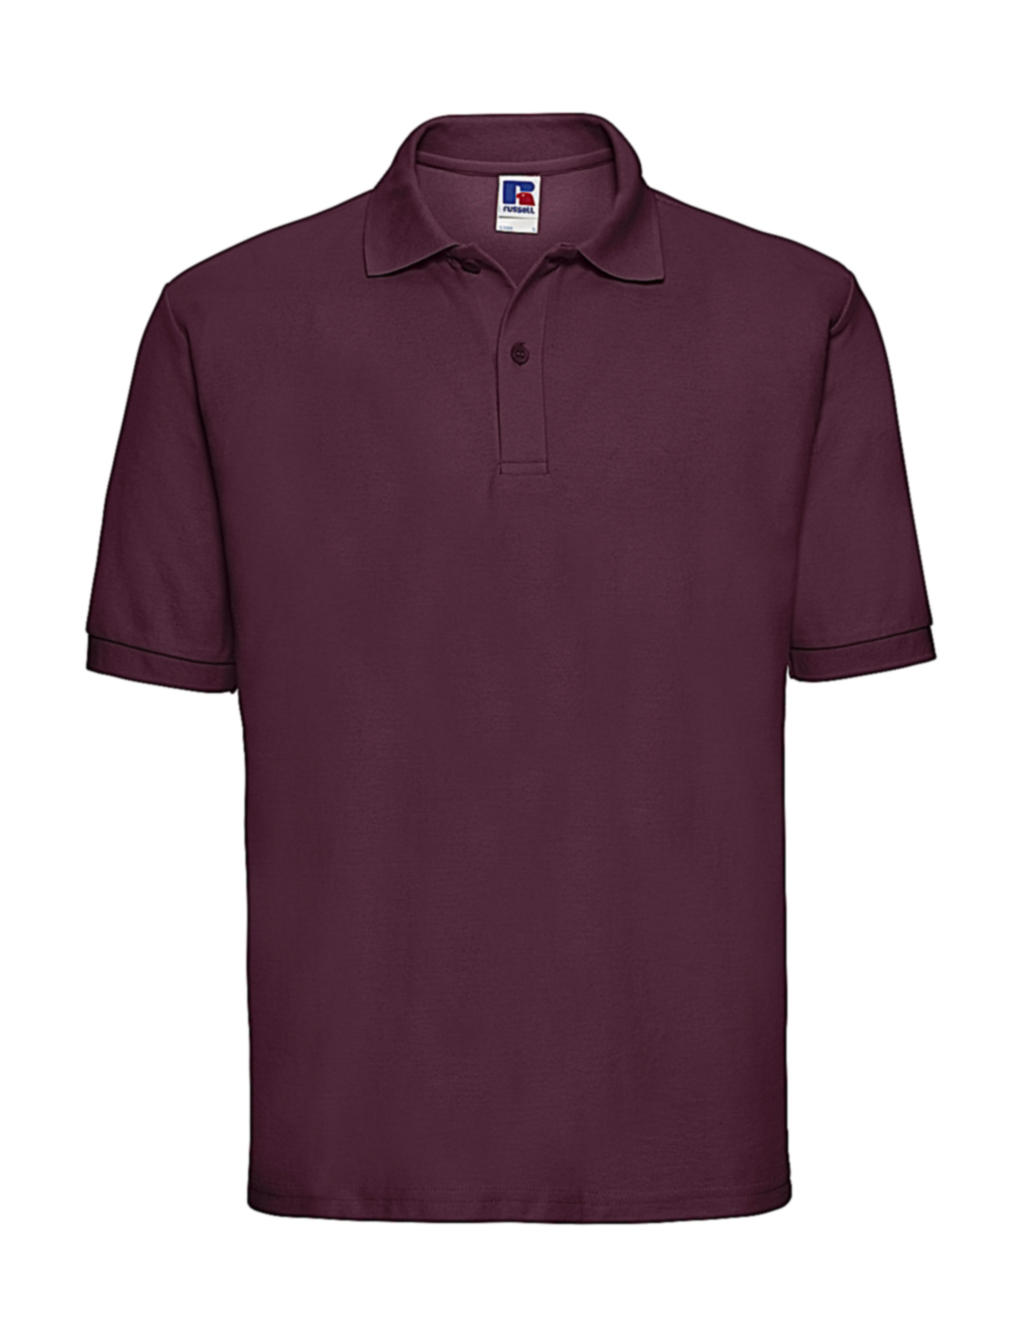  Mens Classic Polycotton Polo in Farbe Burgundy